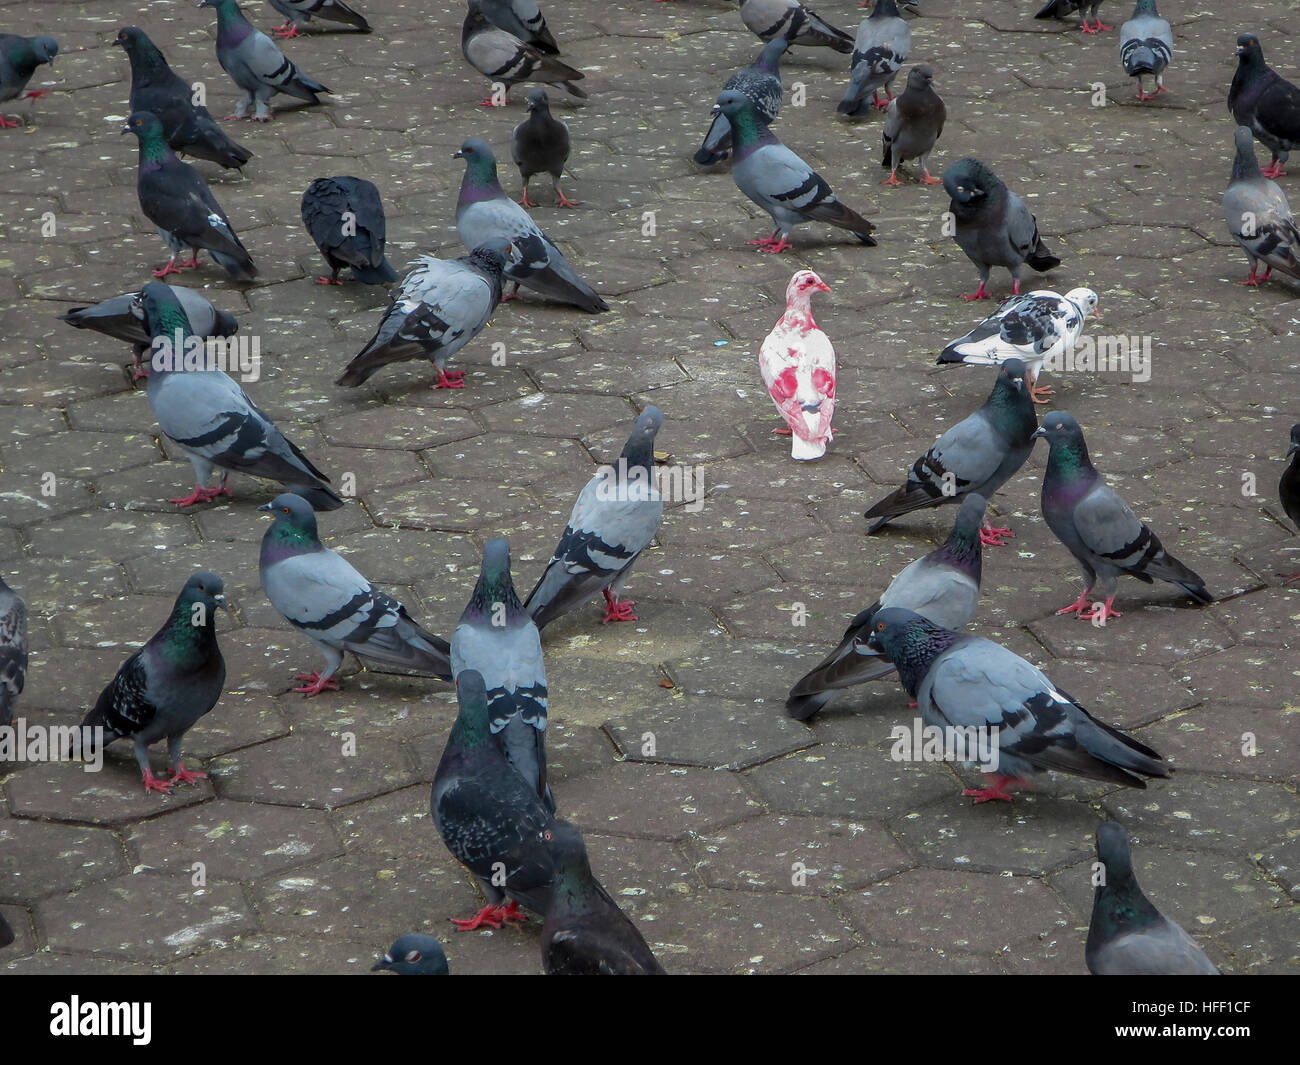 How to stand out in a crowd ... be different. An albino Rock Pigeon is accepted by the flock. Stock Photo